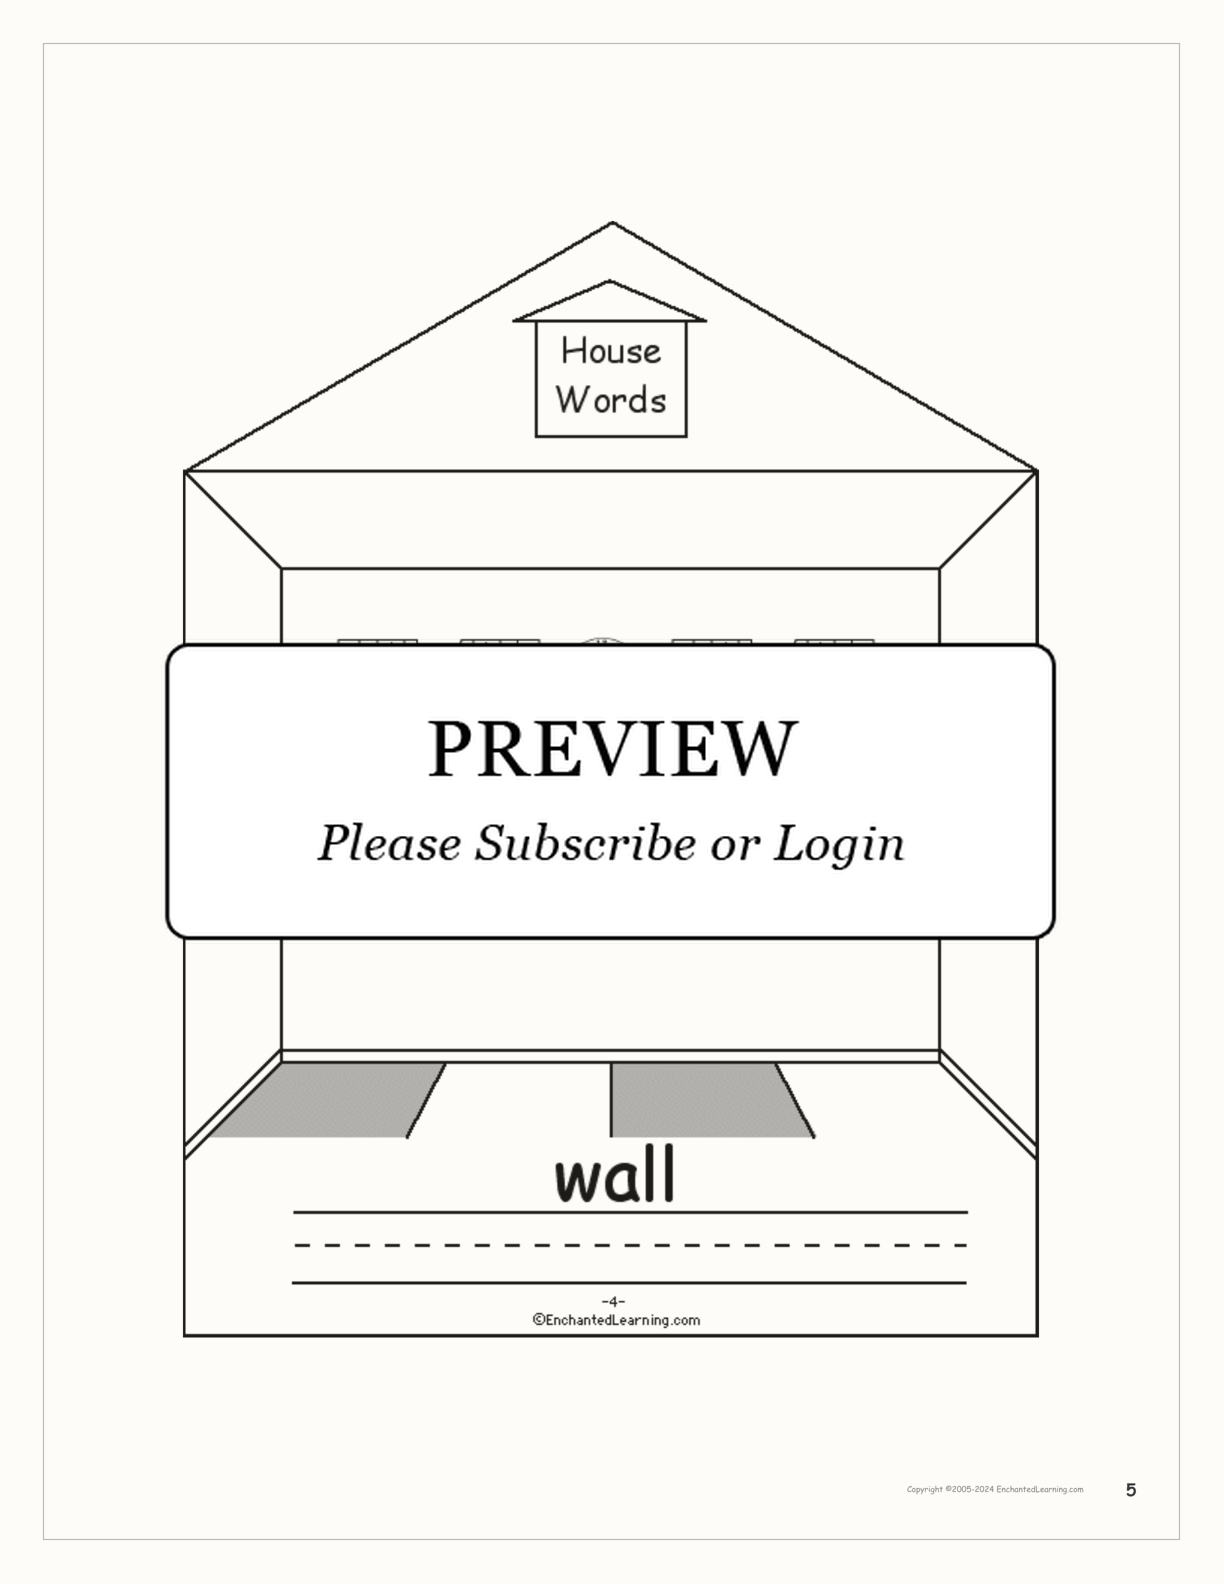 House Words Book interactive printout page 5